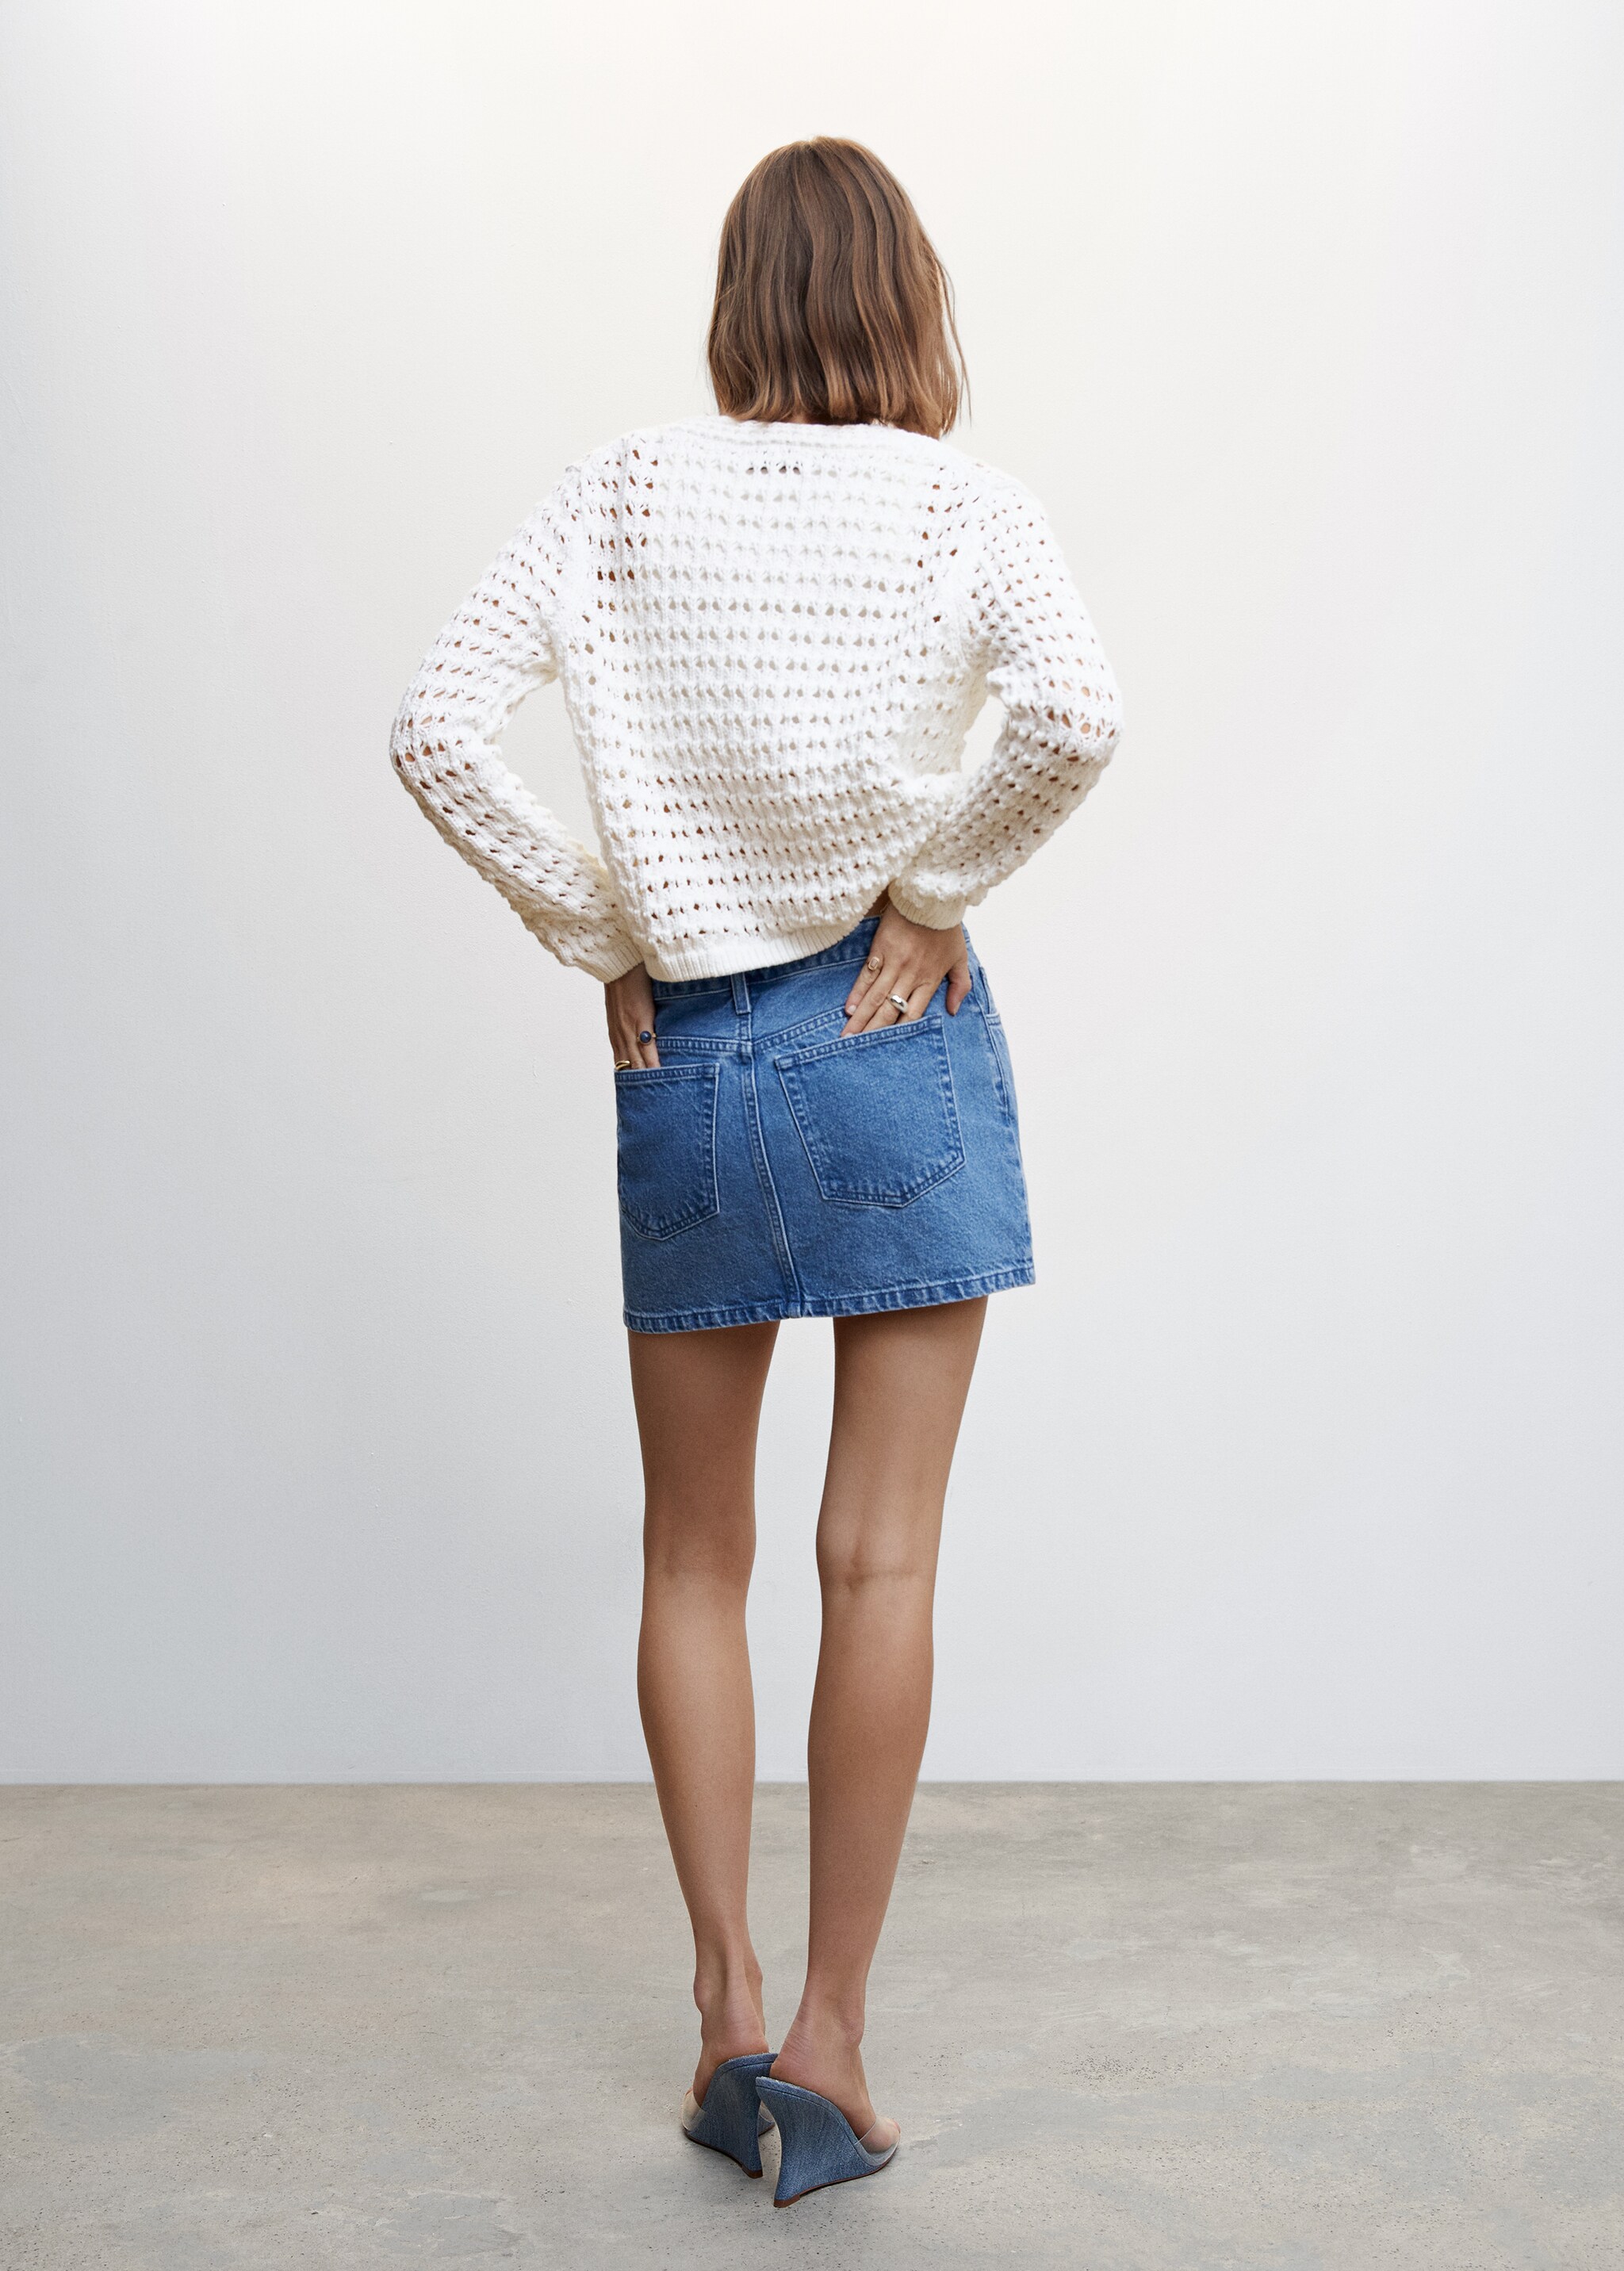 Openwork knit cardigan - Reverse of the article